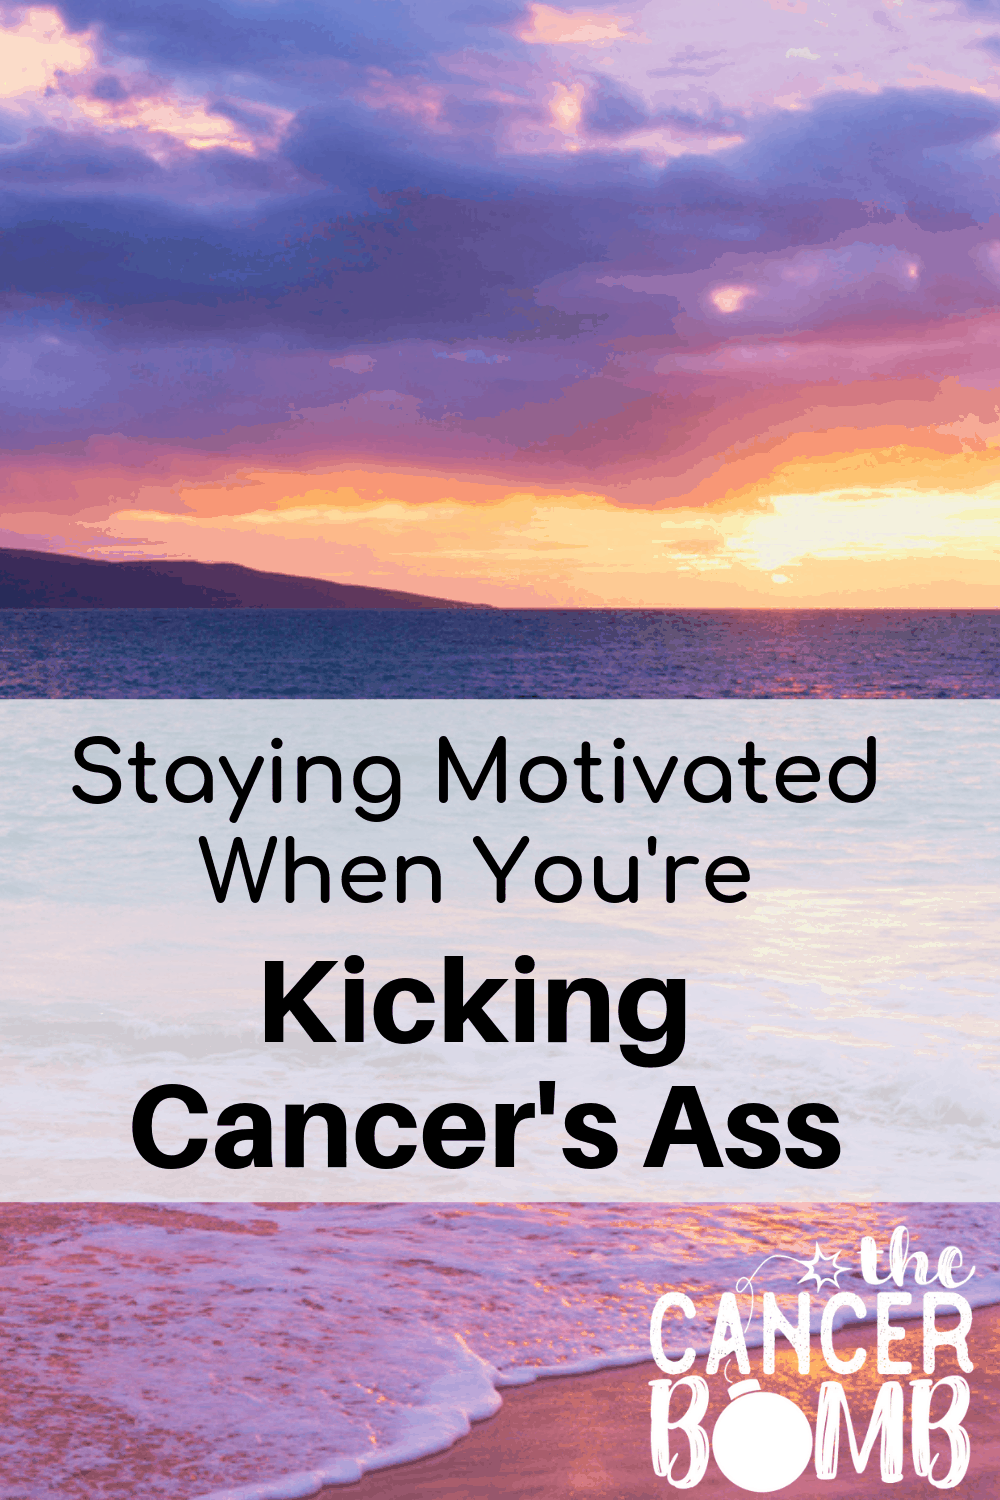 Staying Motivated When You're Kicking Cancer's Ass. This battle is SO exhausting. Just when I thought that I couldn't go any further, this gave me the motivation I needed to keep going! Cancer is not going to beat me...I am ready to start kicking cancer's ass.